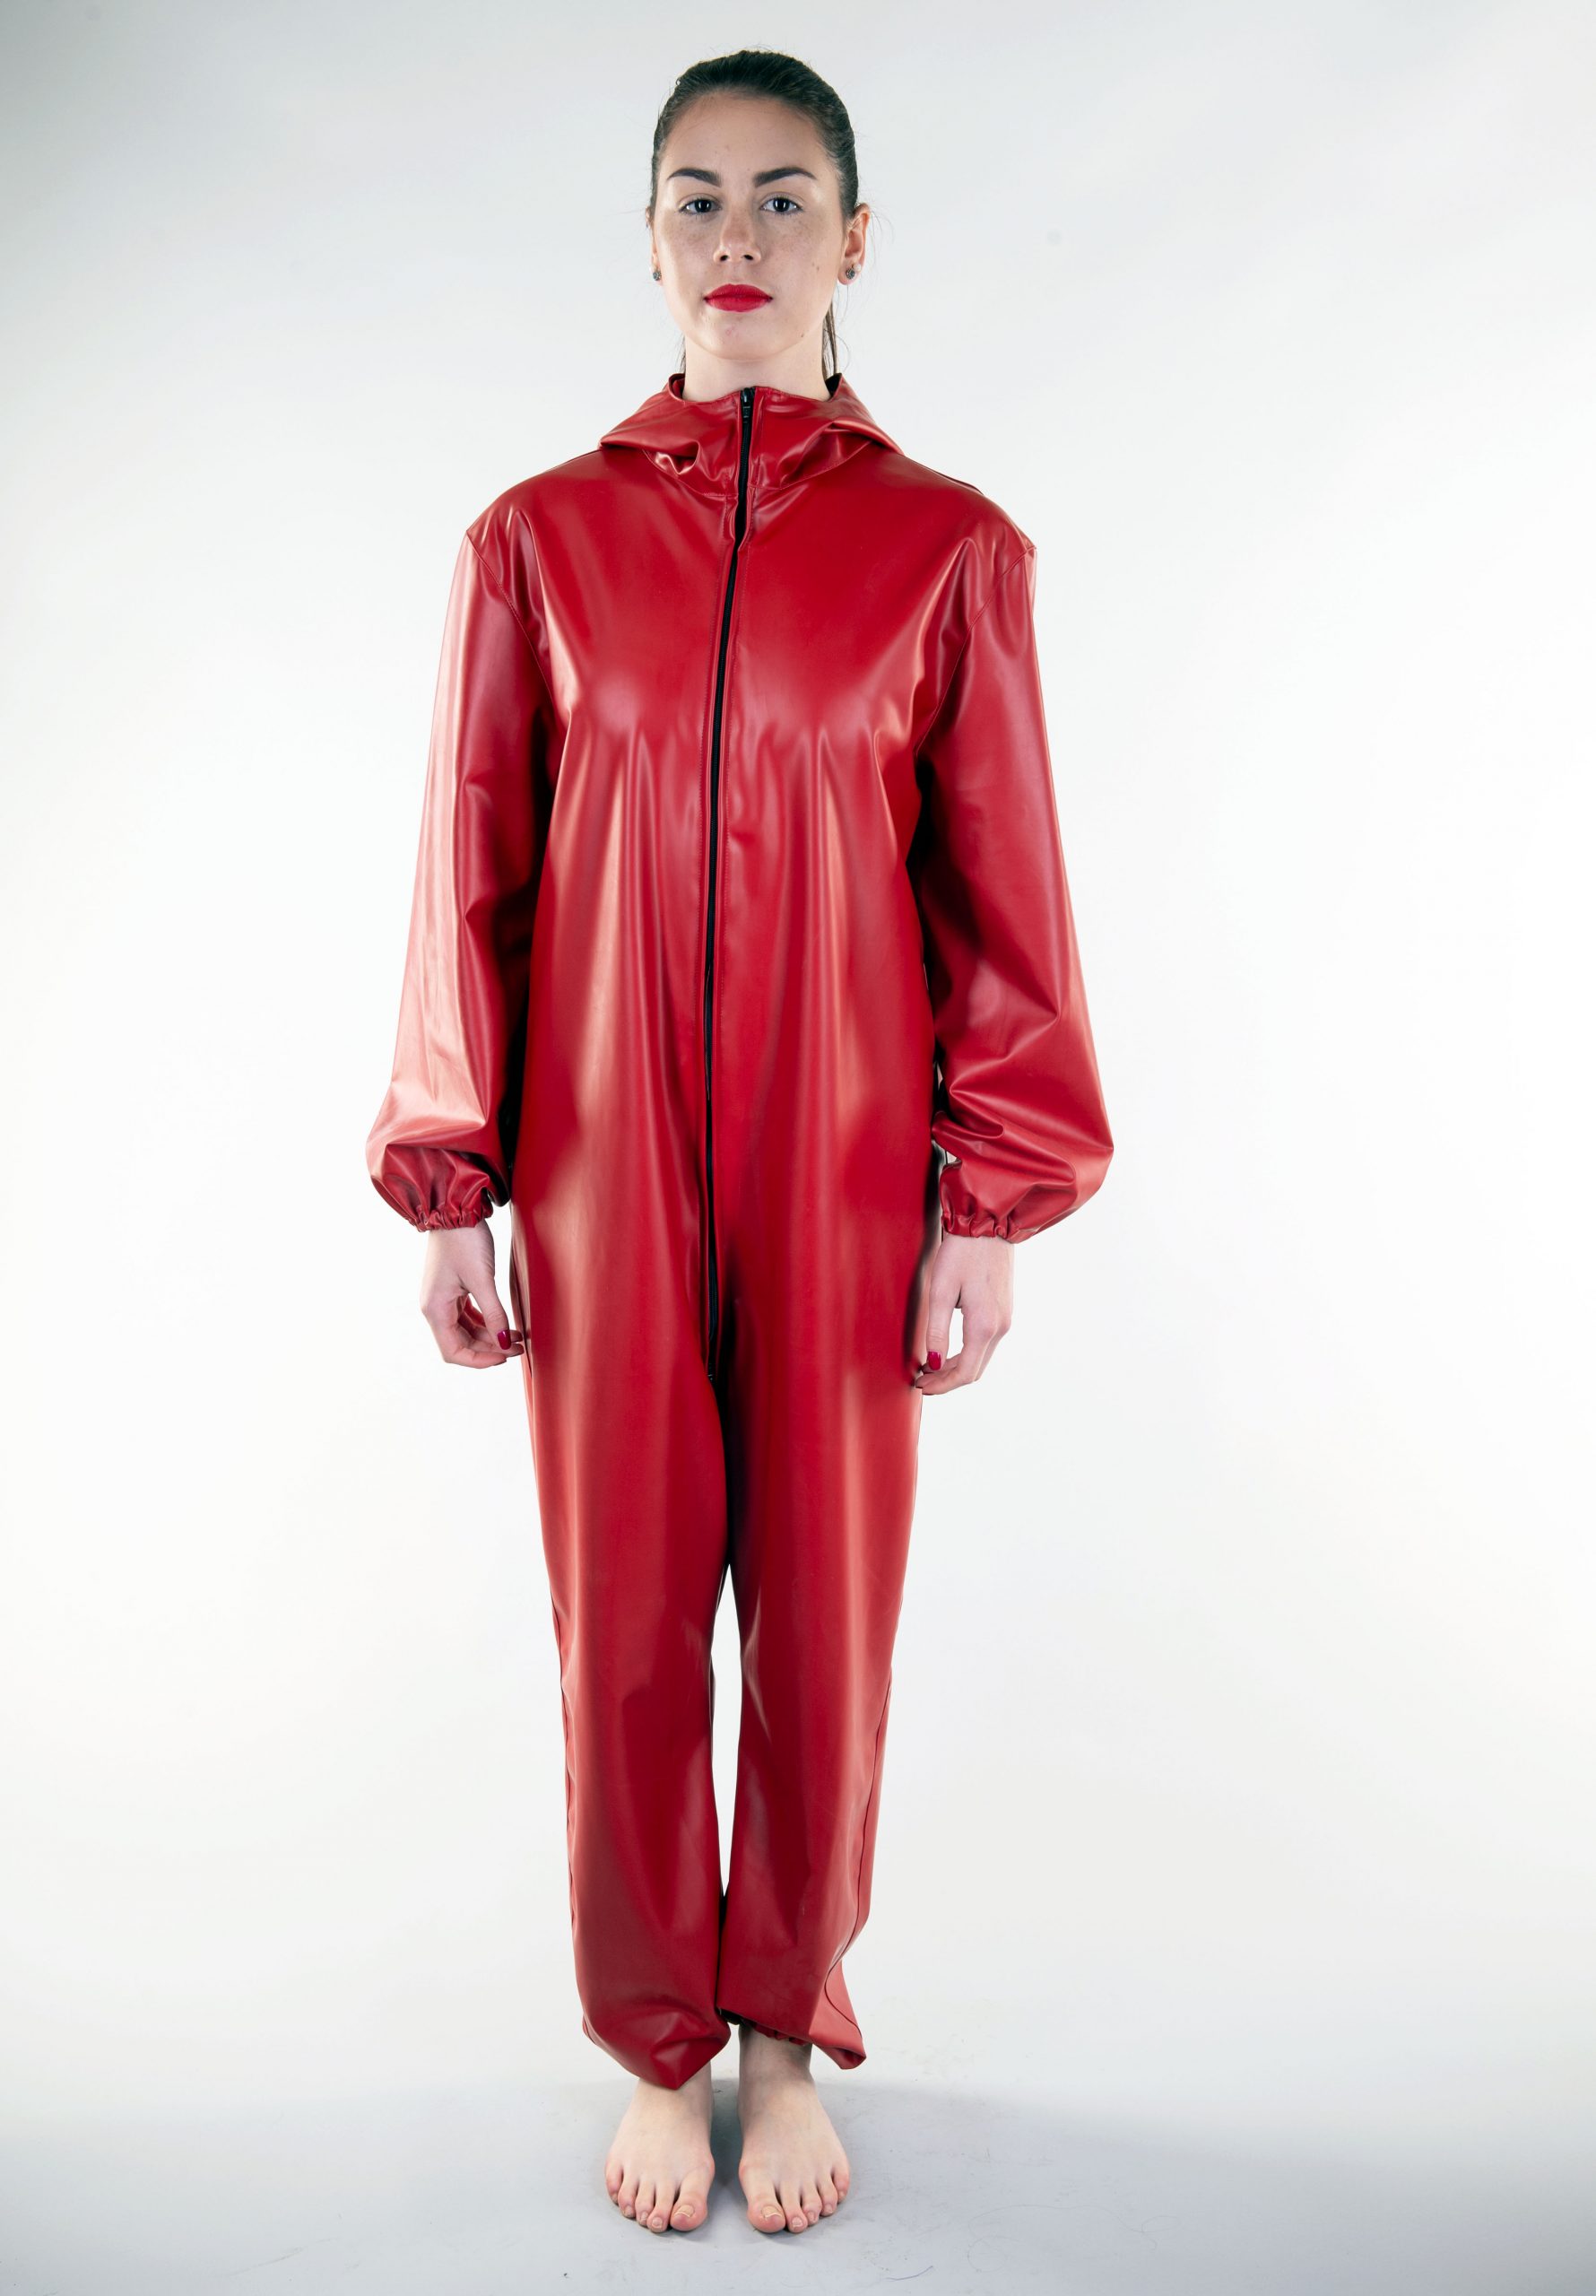 EXERCISE SUIT GENTS - Weathervain